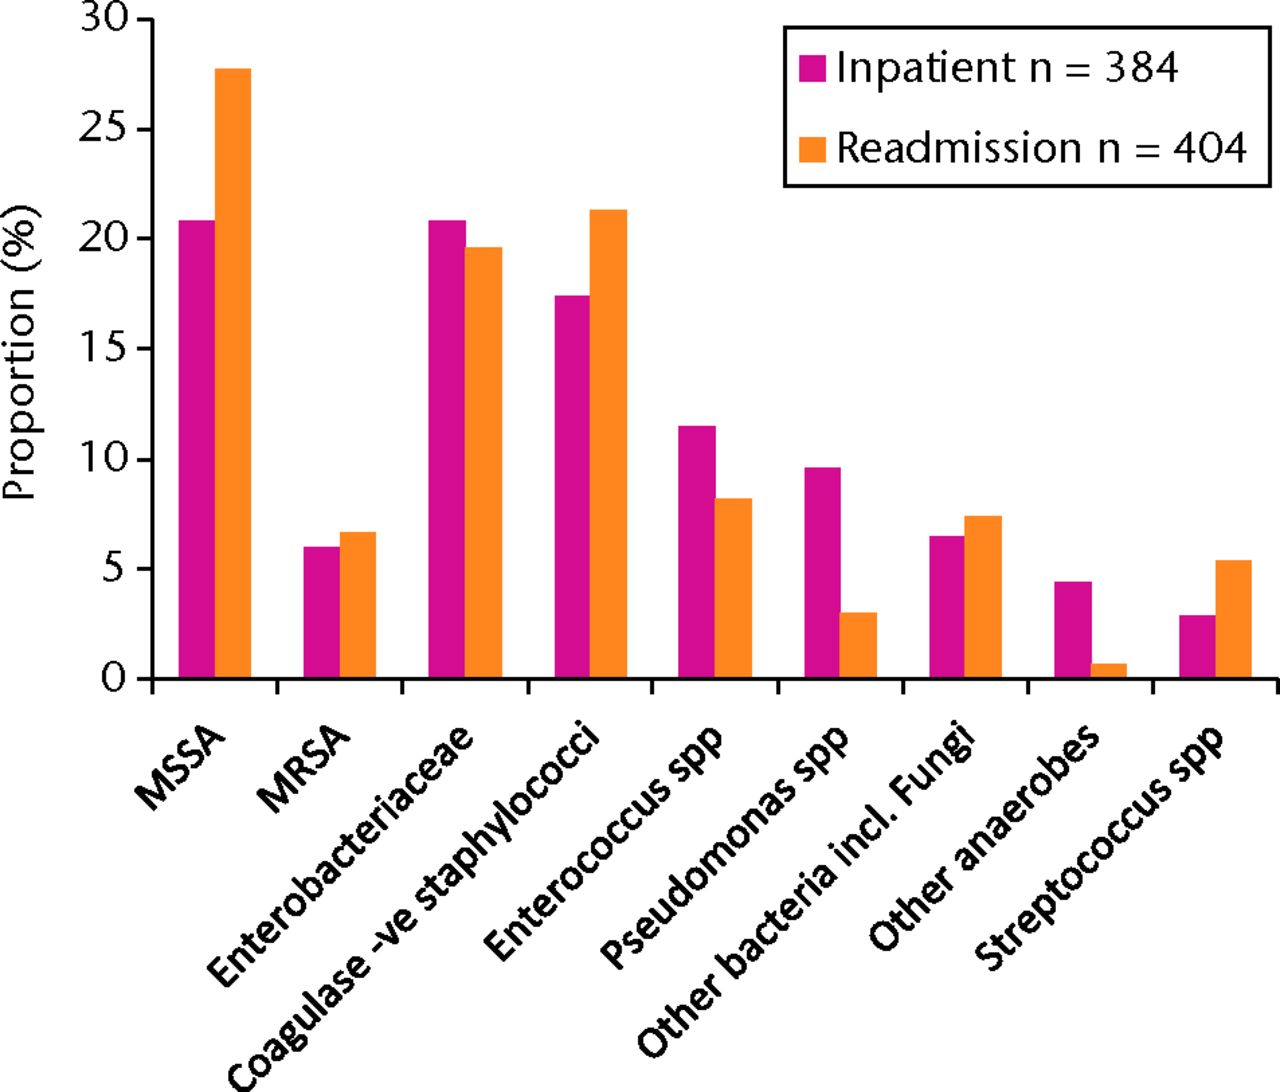 Fig. 1 
          Bar chart showing the distribution of
micro-organisms reported as causing surgical site infections (SSIs)
in mandatory orthopaedic categories, England, 2011/12 (MSSA, methicillin-sensitive Staphylococcus
aureus; MRSA, methicillin-resistant S. aureus;
-ve, negative; ‘Other bacteria’, mostly comprising isolates reported
as ‘unspecified diphtheroids’, corynebacterium spp.
and ‘other gram-positive organisms’). Adapted with permission from
the Health Protection Agency.6
        